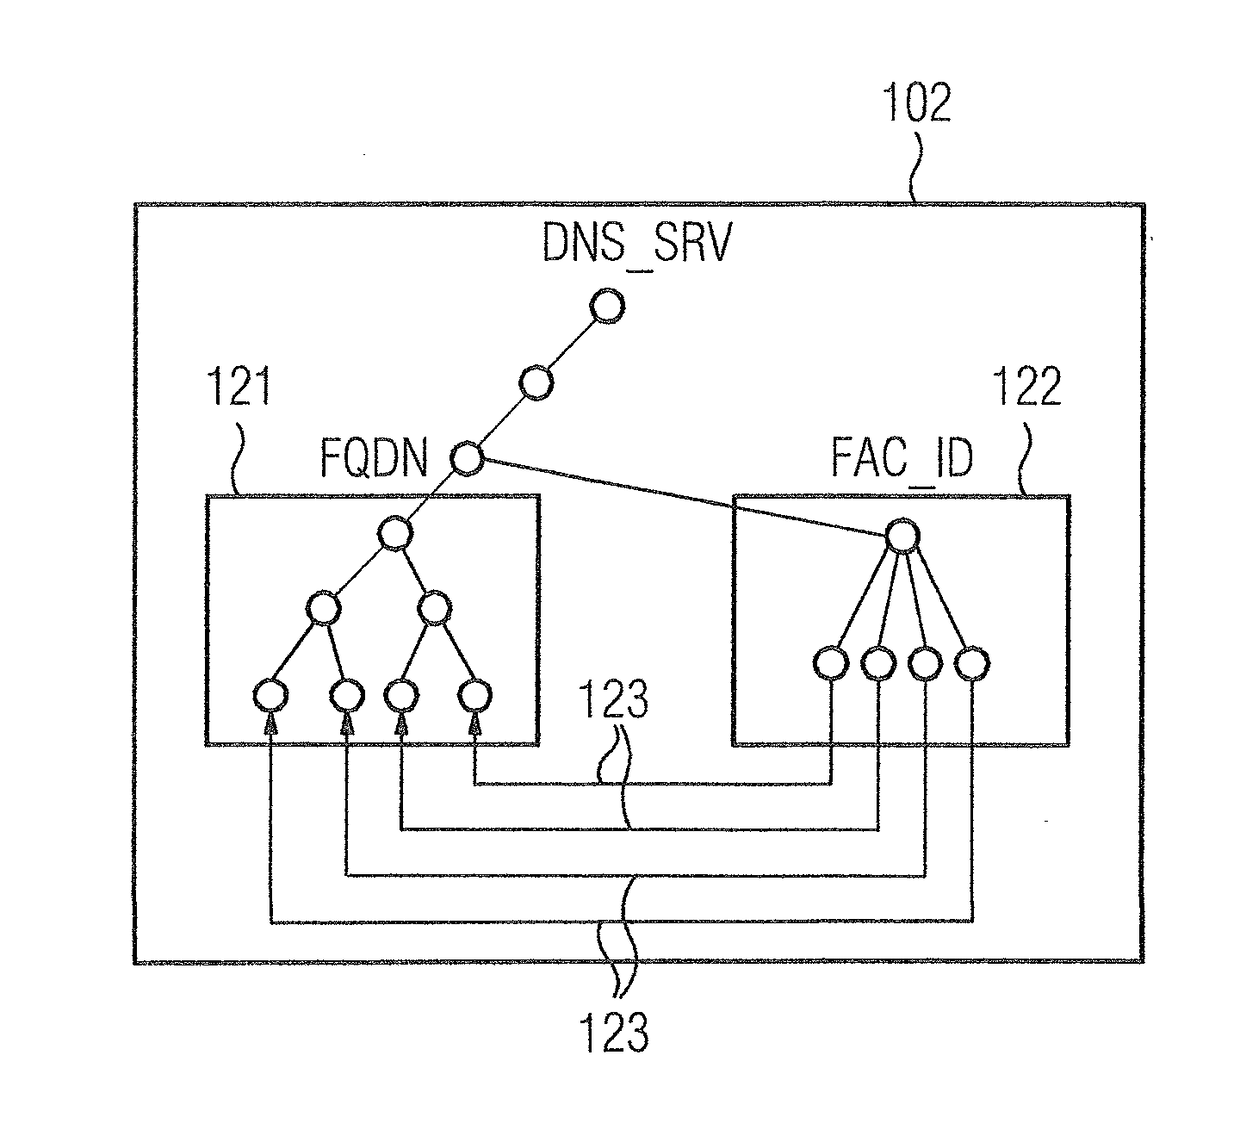 Method for Providing an Expanded Name Service for an Industrial Automation System